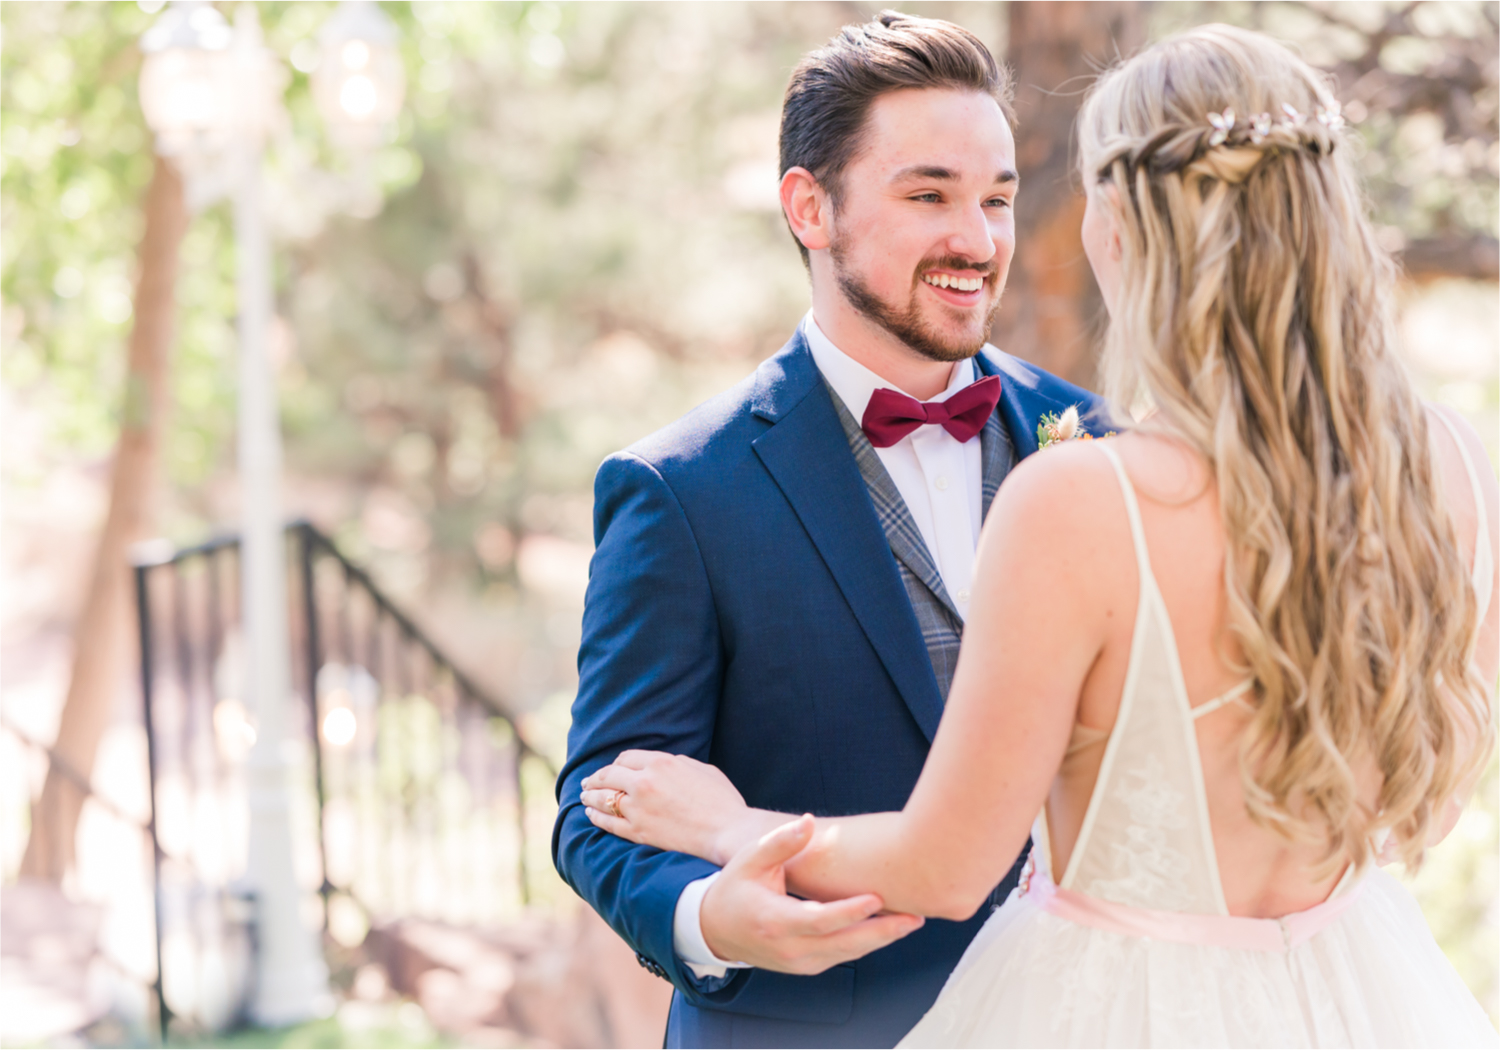 Romantic Whimsical Wedding at the Lionscrest Manor in Lyons, CO | Britni Girard Photography - Wedding Photo and Video Team | Rustic Fall Decor mixed in Burgundy, Blush, Gold and Sage | Groom in Custom Suit from Jos. a Banks | First Look in the garden